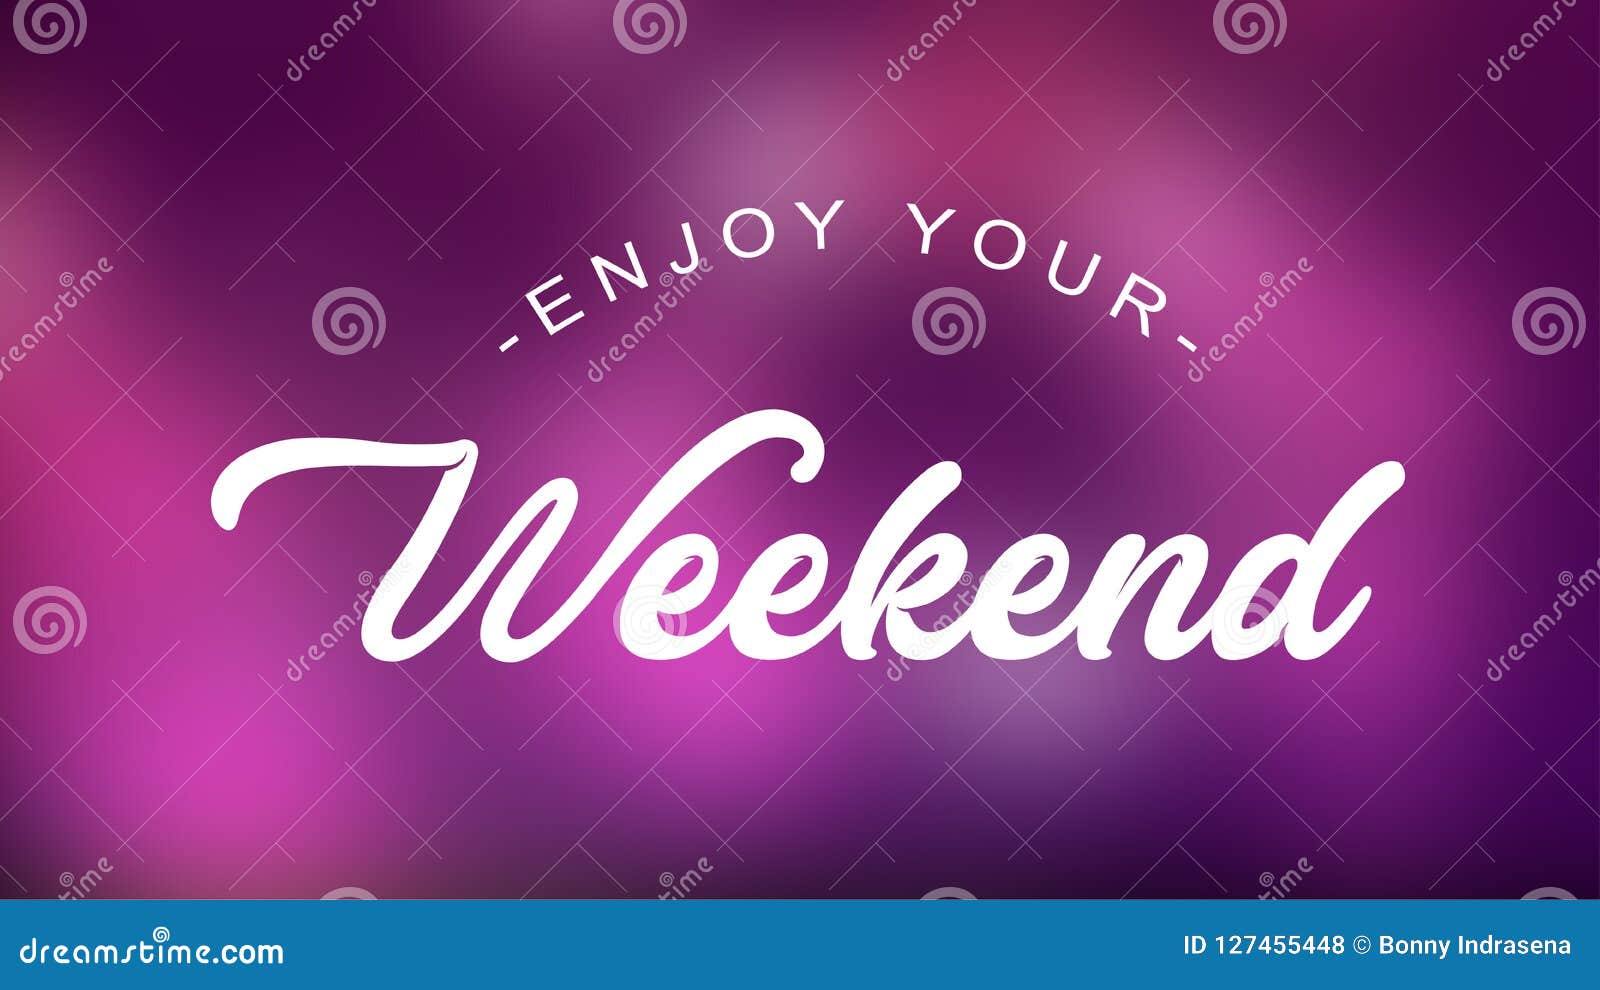 enjoy your weekend quote on elegant background